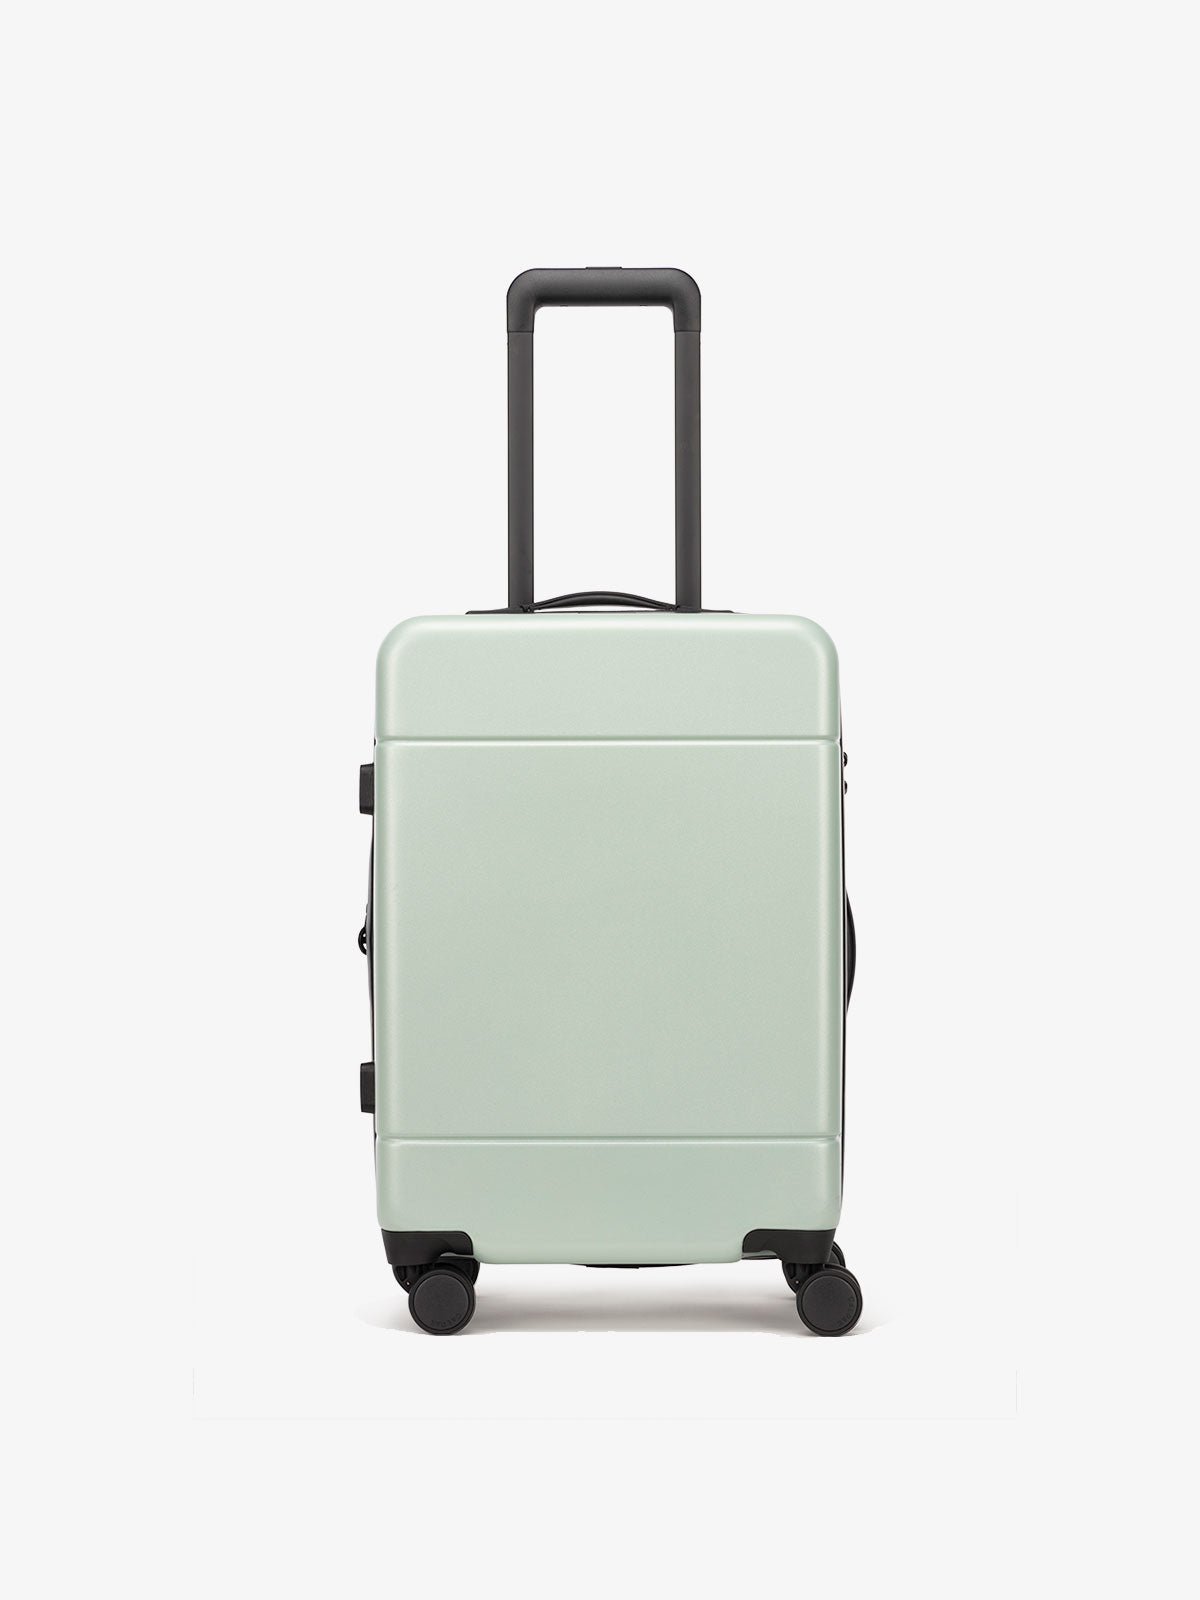 Hue hard shell rolling carry on luggage in light green jade